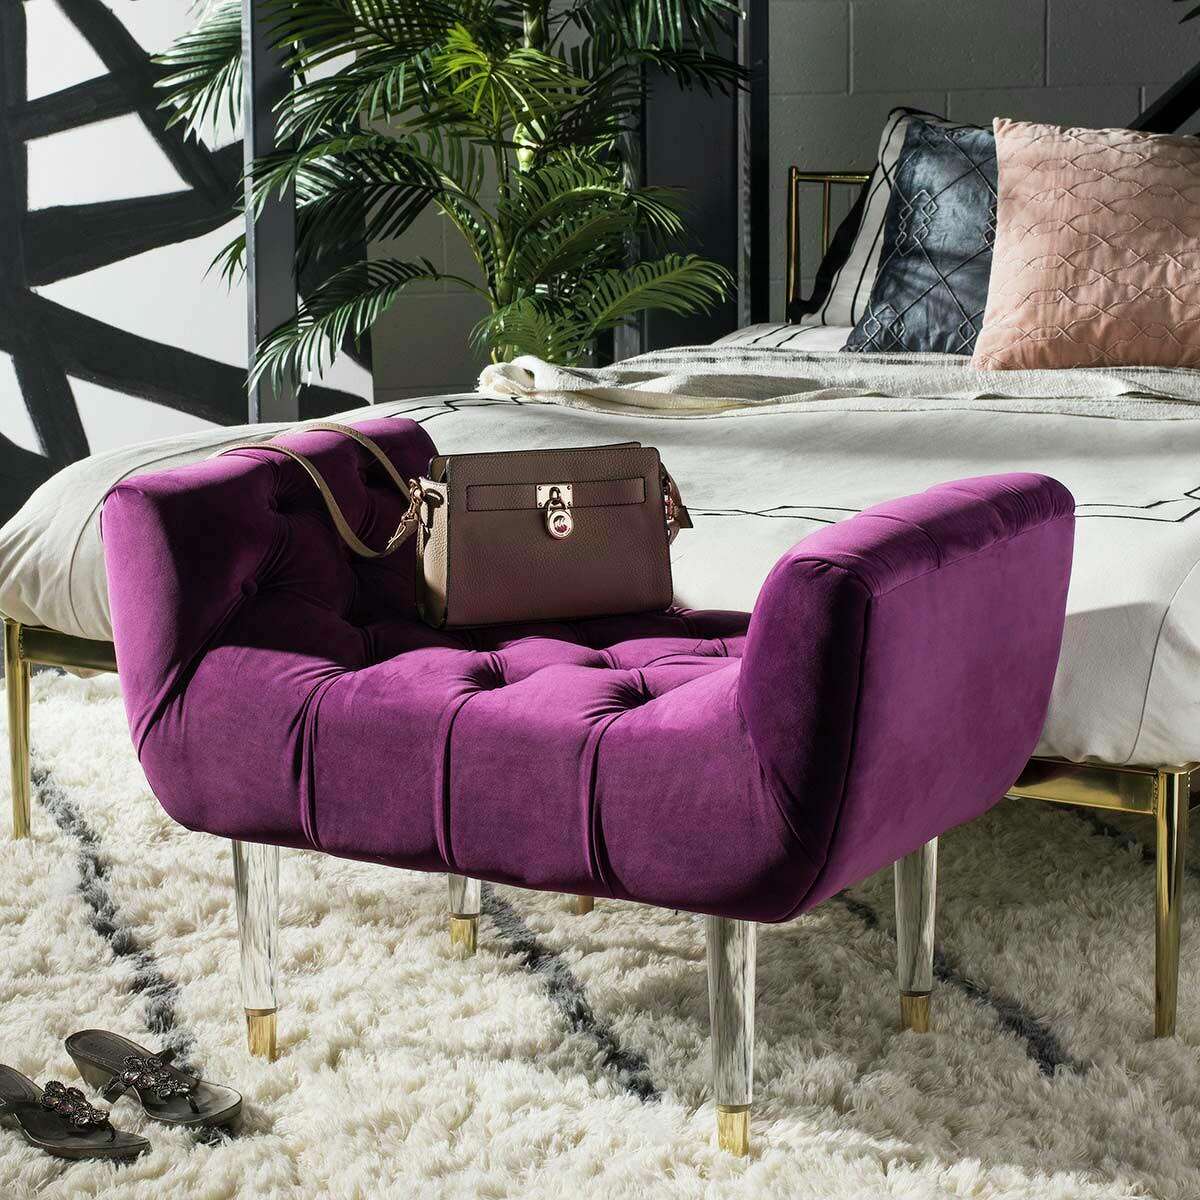 You want deep, romantic colors? Try this Safavieh Eugenie tufted velvet plum accent bench.